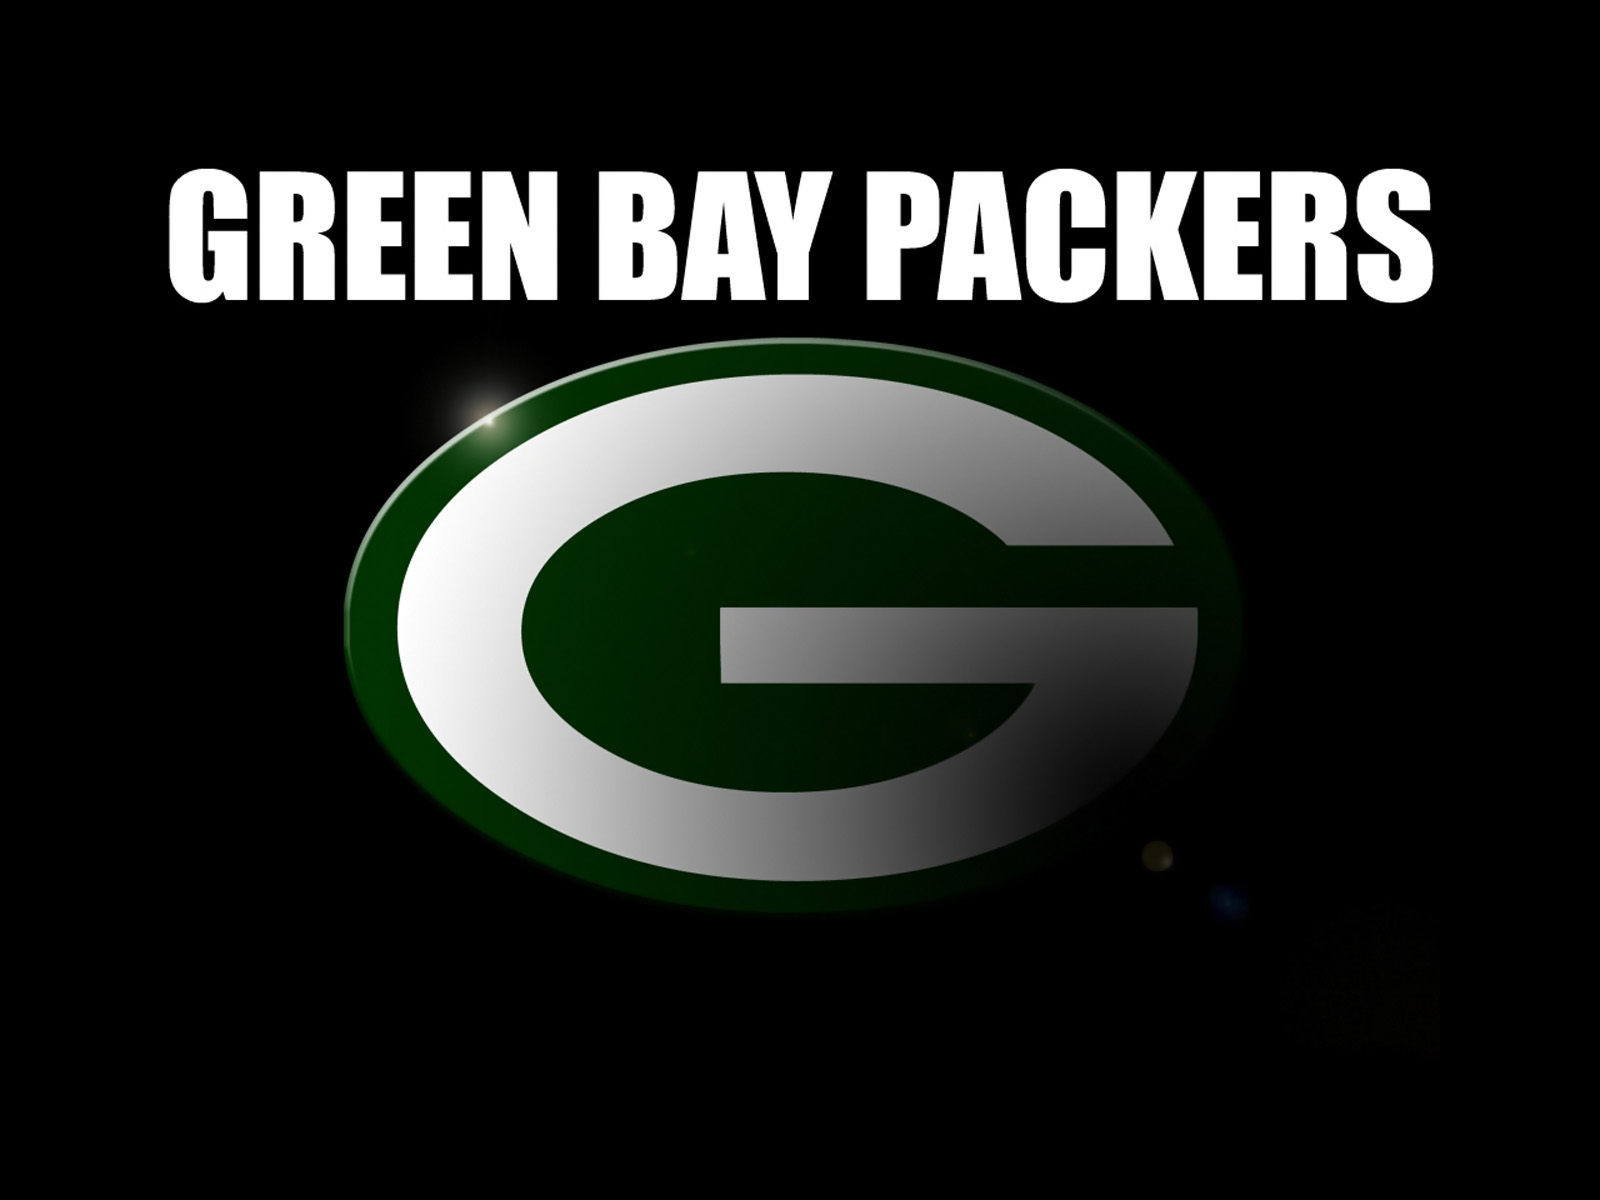 Green Bay Packers Schedule Wallpaper 69 images